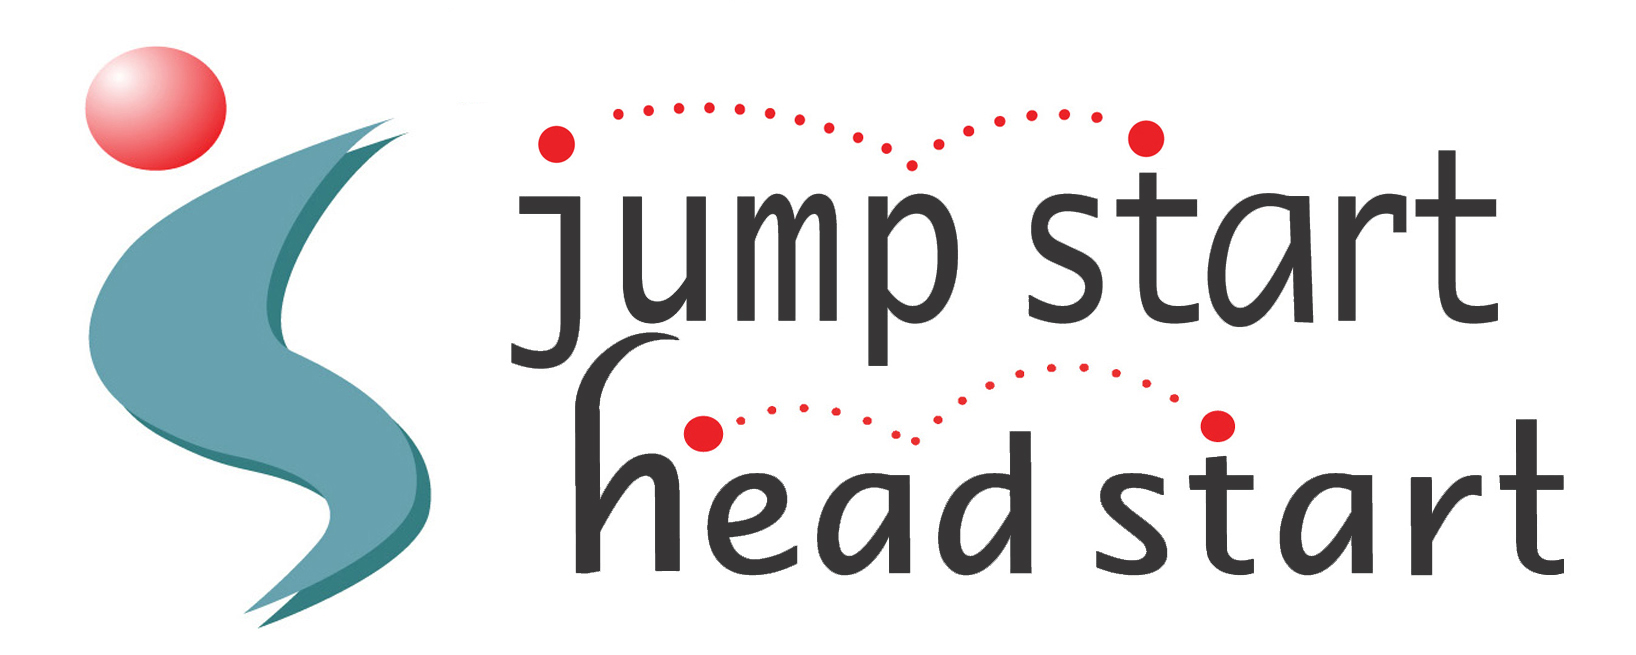 Teaching English and Living in Taiwan, Join Our Team @ Jump Start! image